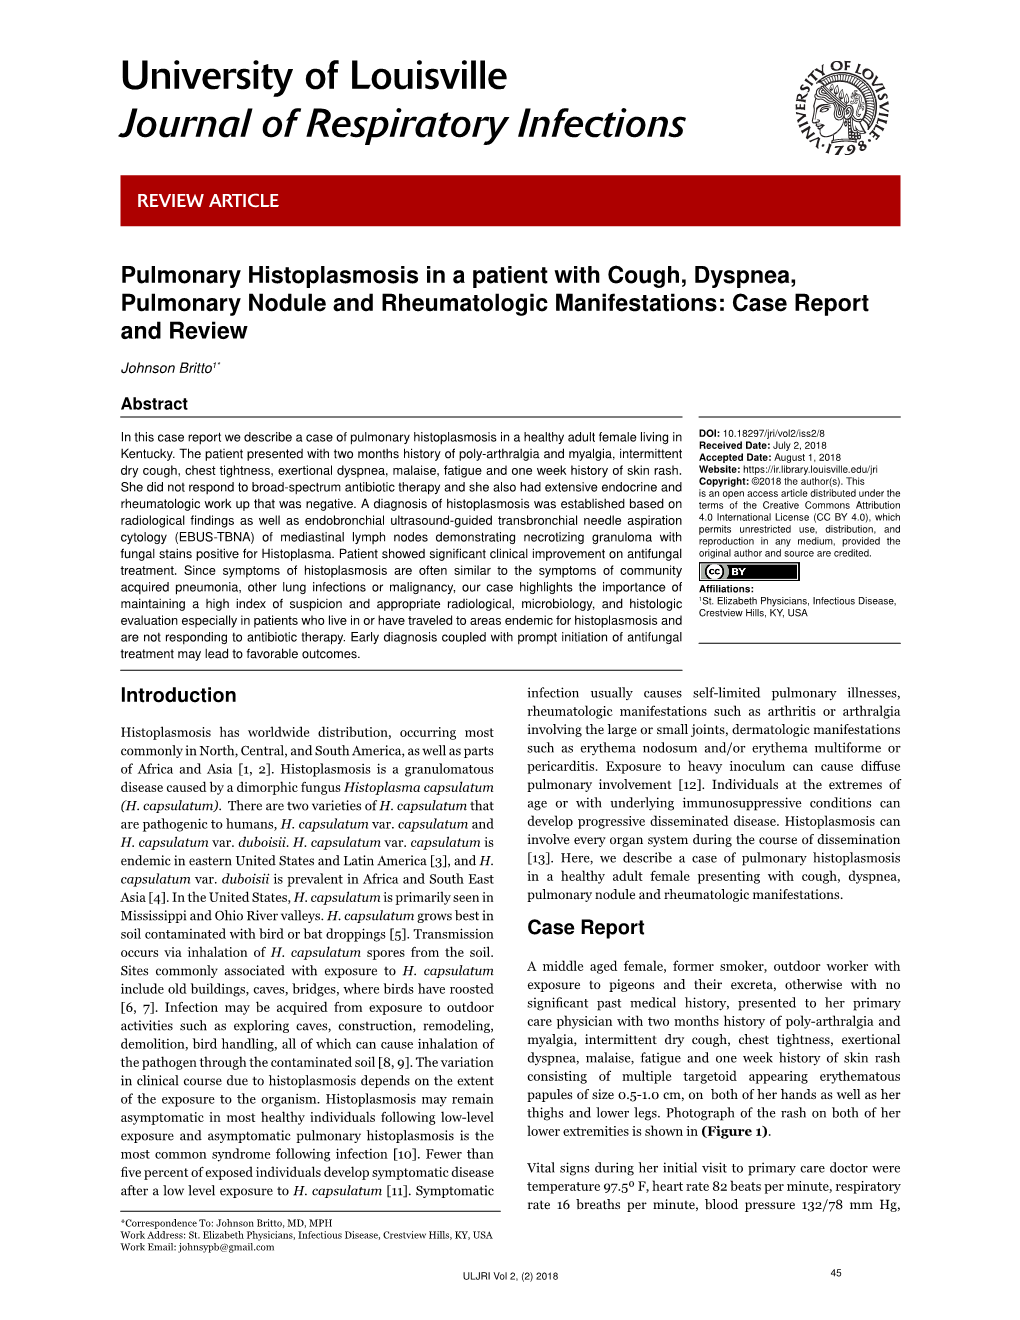 Pulmonary Histoplasmosis in a Patient with Cough, Dyspnea, Pulmonary Nodule and Rheumatologic Manifestations: Case Report and Review